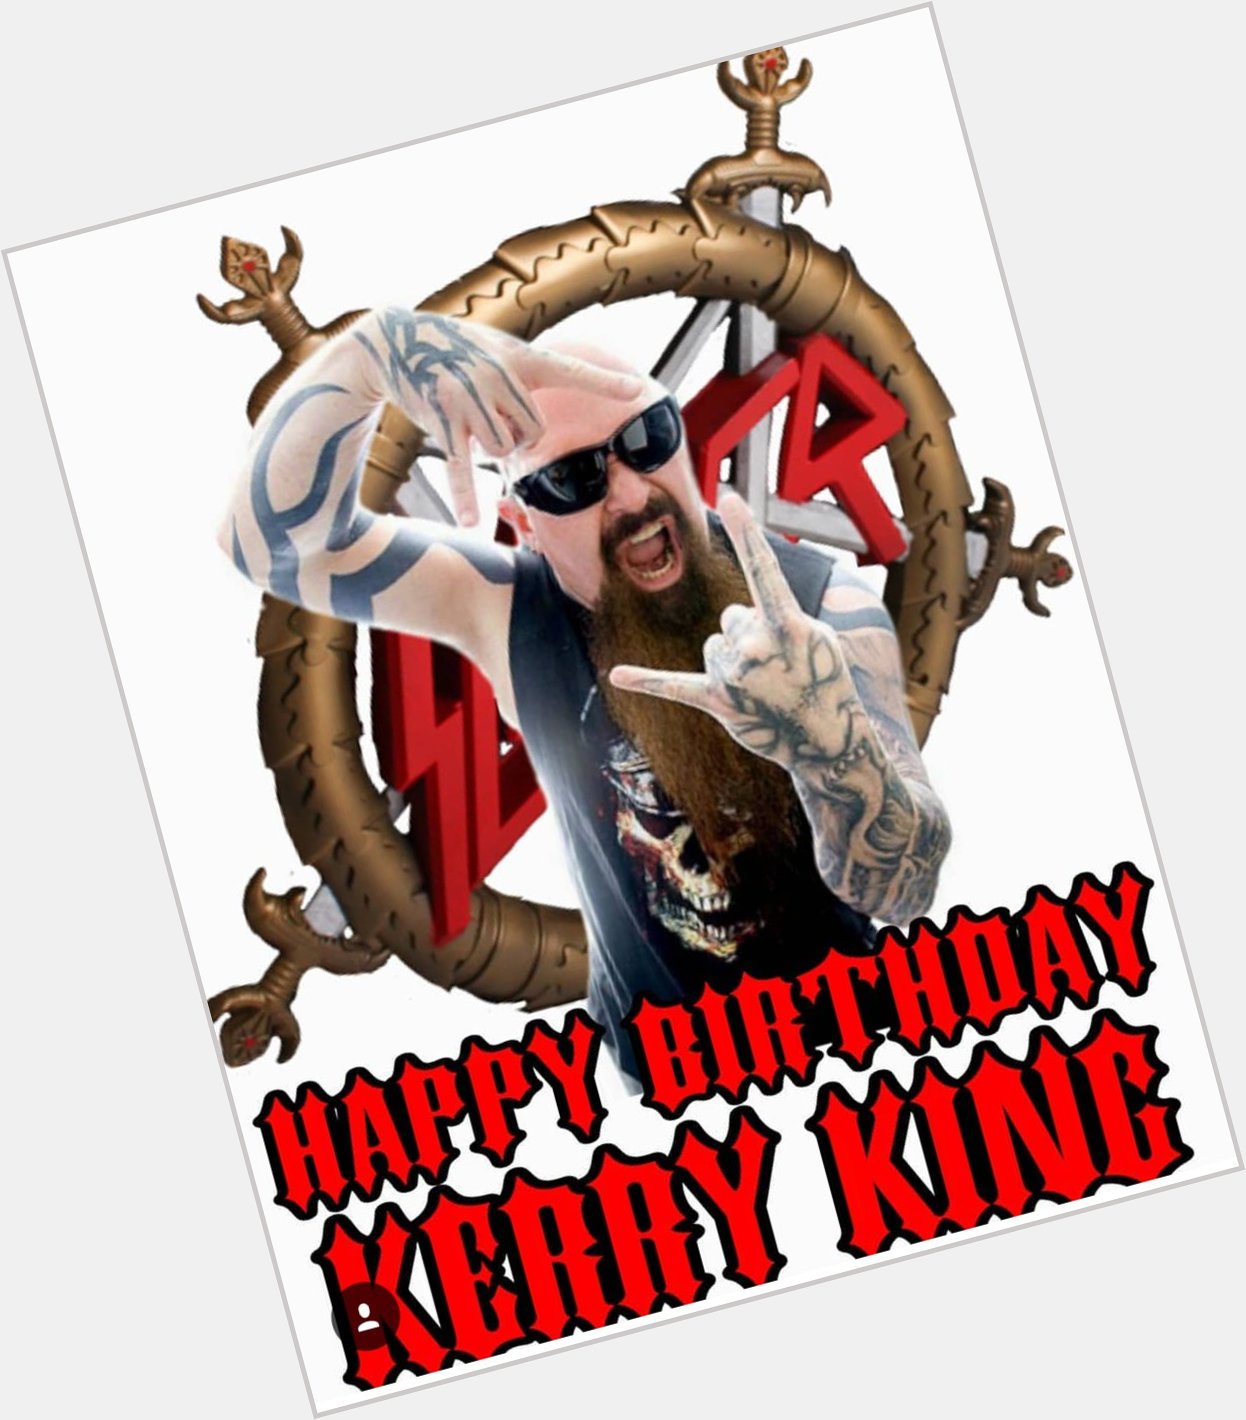  HAPPY BIRTHDAY TO KERRY KING TODAY.    